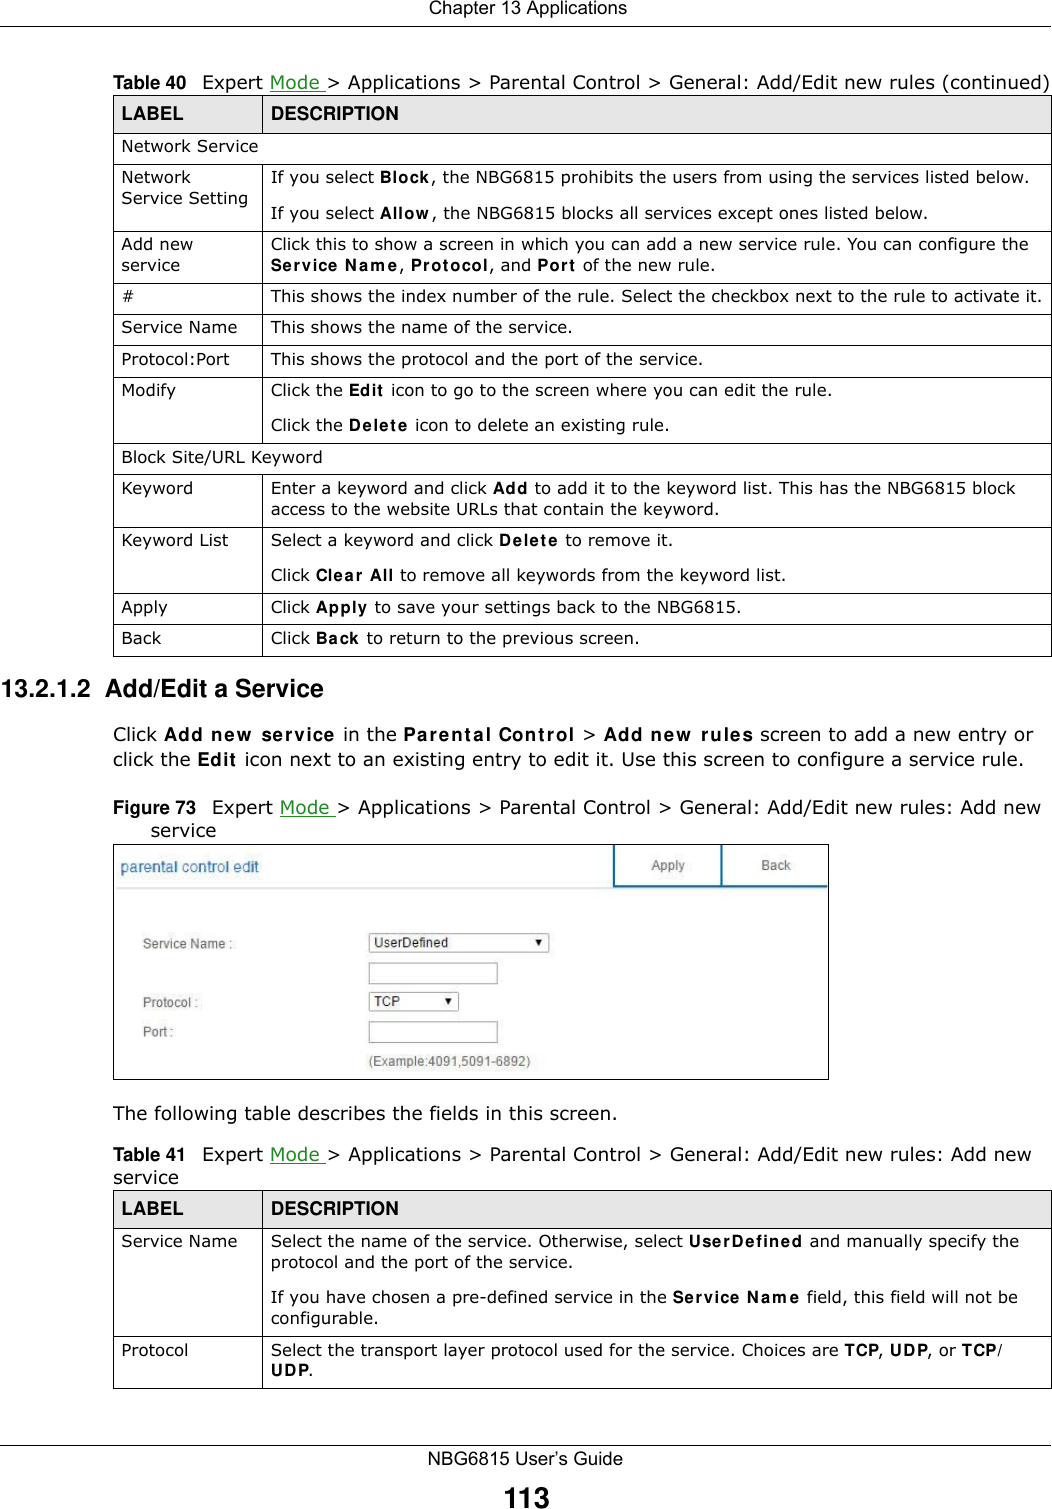  Chapter 13 ApplicationsNBG6815 User’s Guide11313.2.1.2  Add/Edit a ServiceClick Add new service in the Parental Control &gt; Add new rules screen to add a new entry or click the Edit icon next to an existing entry to edit it. Use this screen to configure a service rule.Figure 73   Expert Mode &gt; Applications &gt; Parental Control &gt; General: Add/Edit new rules: Add new service The following table describes the fields in this screen. Network ServiceNetwork Service Setting If you select Block, the NBG6815 prohibits the users from using the services listed below.If you select Allow, the NBG6815 blocks all services except ones listed below.Add new serviceClick this to show a screen in which you can add a new service rule. You can configure the Service Name, Protocol, and Port of the new rule.#This shows the index number of the rule. Select the checkbox next to the rule to activate it.Service Name This shows the name of the service.Protocol:Port This shows the protocol and the port of the service.Modify Click the Edit icon to go to the screen where you can edit the rule.Click the Delete icon to delete an existing rule.Block Site/URL KeywordKeyword Enter a keyword and click Add to add it to the keyword list. This has the NBG6815 block access to the website URLs that contain the keyword.Keyword List Select a keyword and click Delete to remove it. Click Clear All to remove all keywords from the keyword list.Apply Click Apply to save your settings back to the NBG6815.Back Click Back to return to the previous screen.Table 40   Expert Mode &gt; Applications &gt; Parental Control &gt; General: Add/Edit new rules (continued)LABEL DESCRIPTIONTable 41   Expert Mode &gt; Applications &gt; Parental Control &gt; General: Add/Edit new rules: Add new serviceLABEL DESCRIPTIONService Name Select the name of the service. Otherwise, select UserDefined and manually specify the protocol and the port of the service.If you have chosen a pre-defined service in the Service Name field, this field will not be configurable.Protocol Select the transport layer protocol used for the service. Choices are TCP, UDP, or TCP/UDP. 